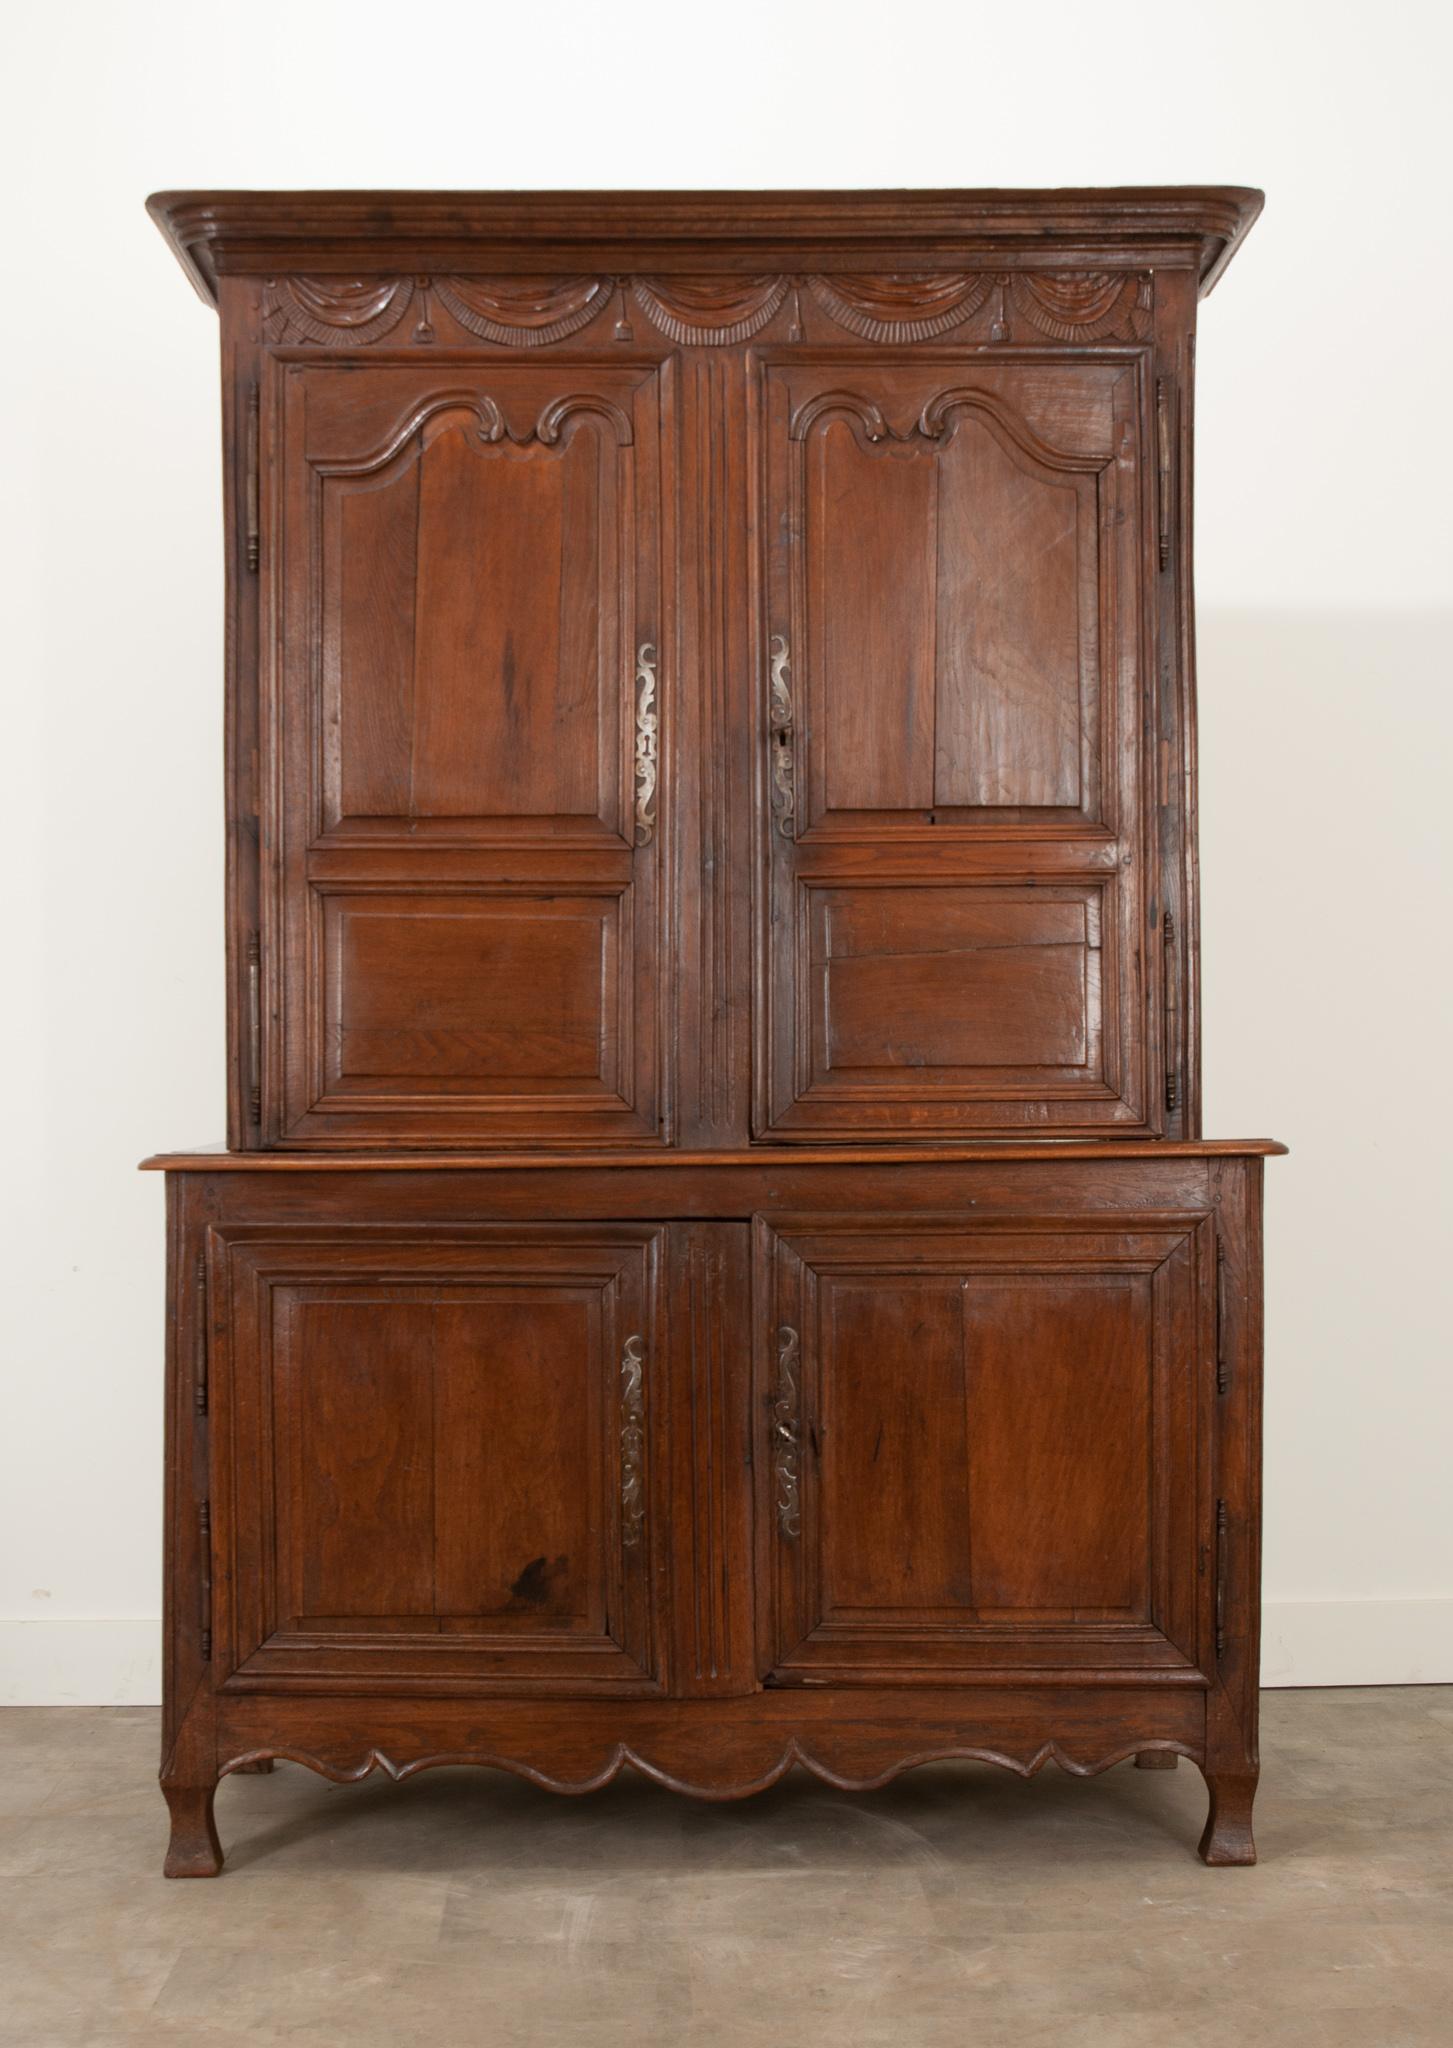 A handsome and sizable solid oak buffet a’ deux corps with Provincial charm from 19th century France. This four door case antique is split into two bodies: a larger lower body and a smaller upper body. The upper is crowned with an molded cornice